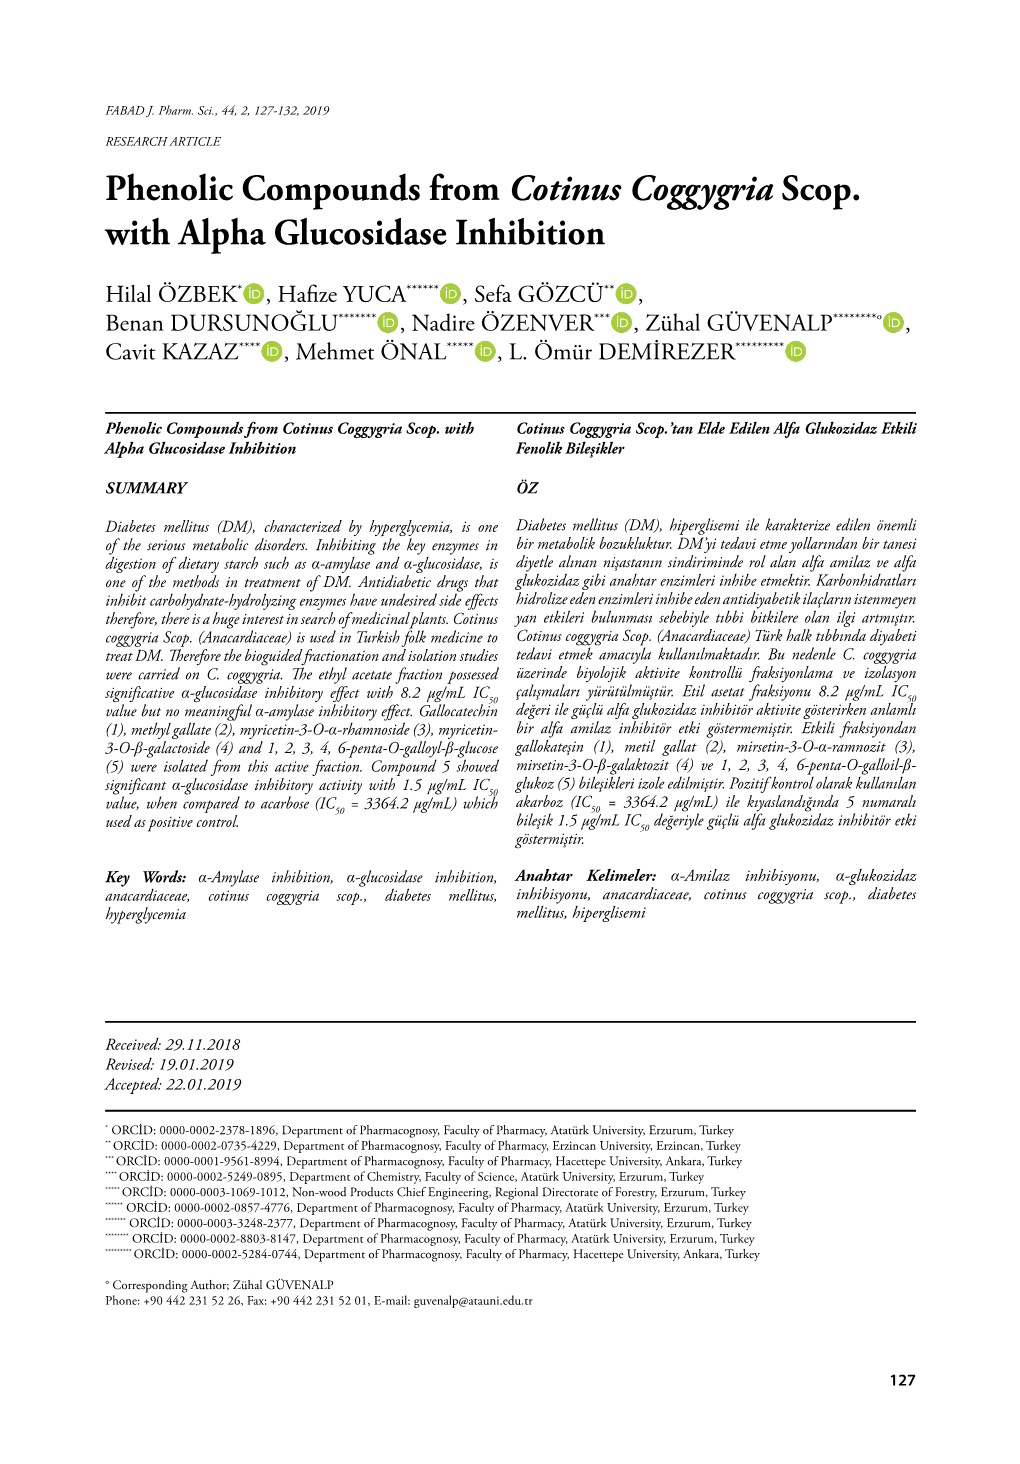 Phenolic Compounds from Cotinus Coggygria Scop. with Alpha Glucosidase Inhibition